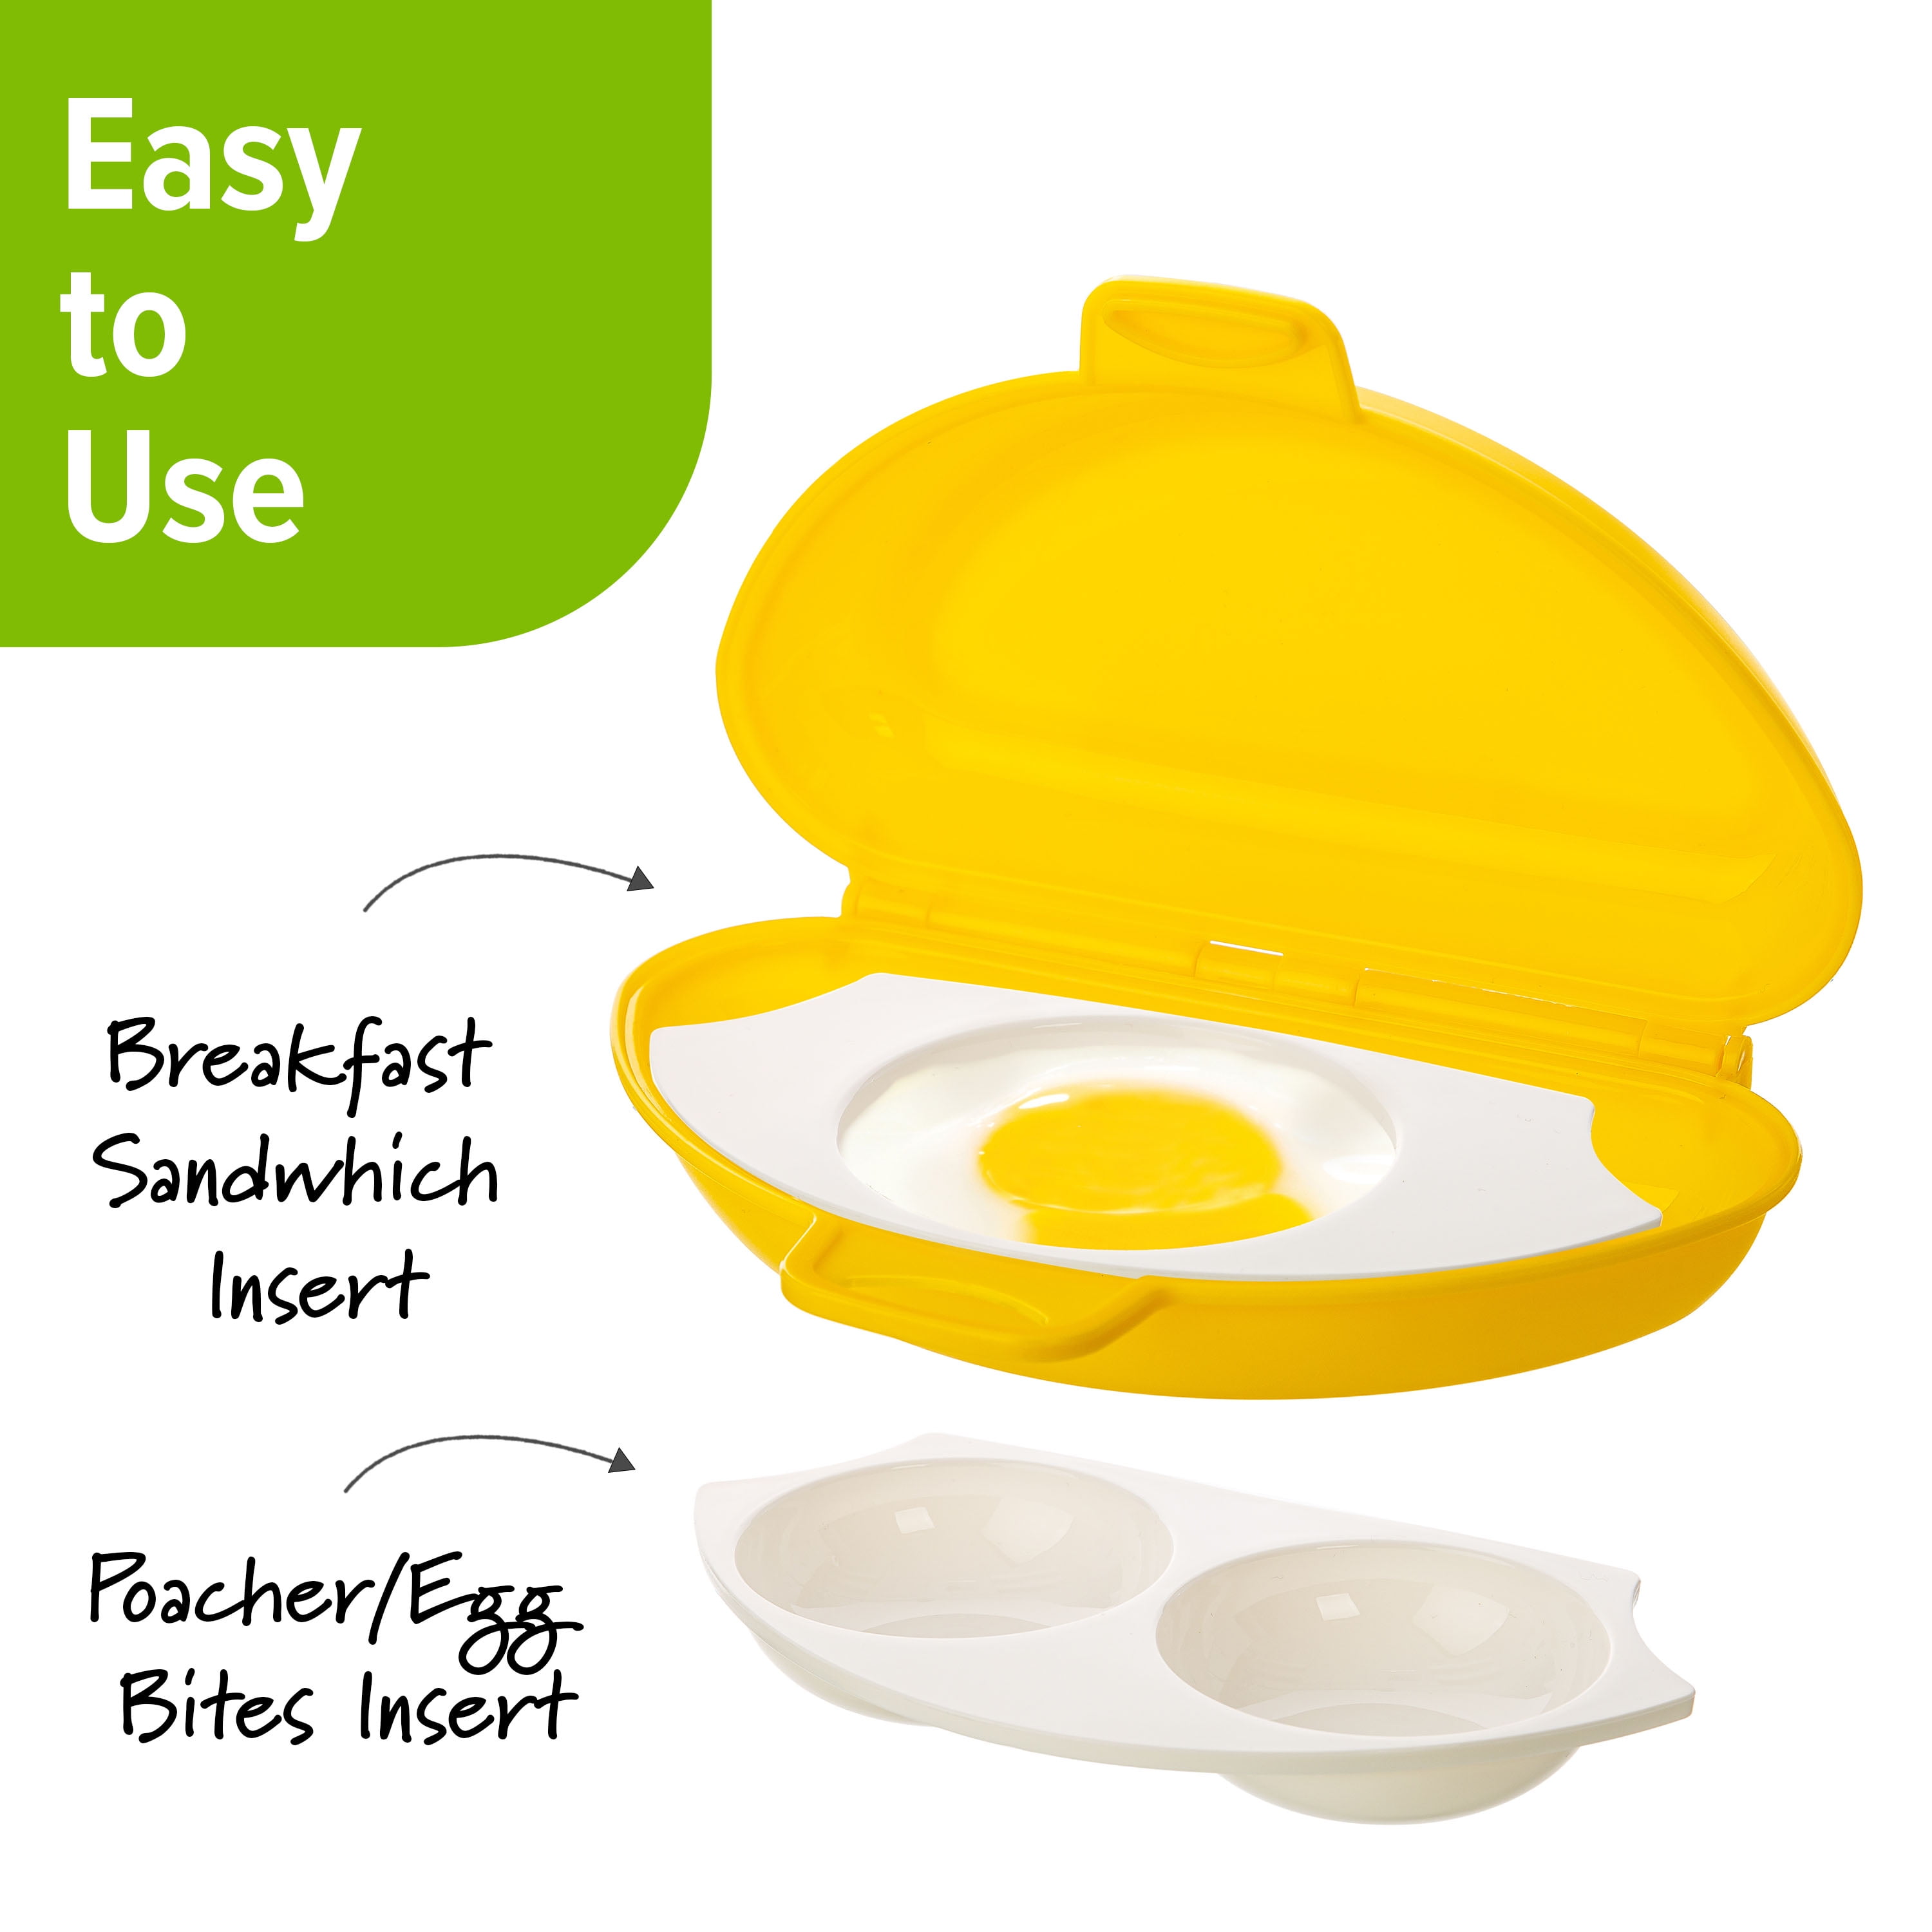 Microwave Egg Cooker, 4 Cavities Egg Cooker for Microwave Egg Boiler with  Lid for Hard Boiled Eggs Microwavable Egg Poacher Cooking Kitchen Tools